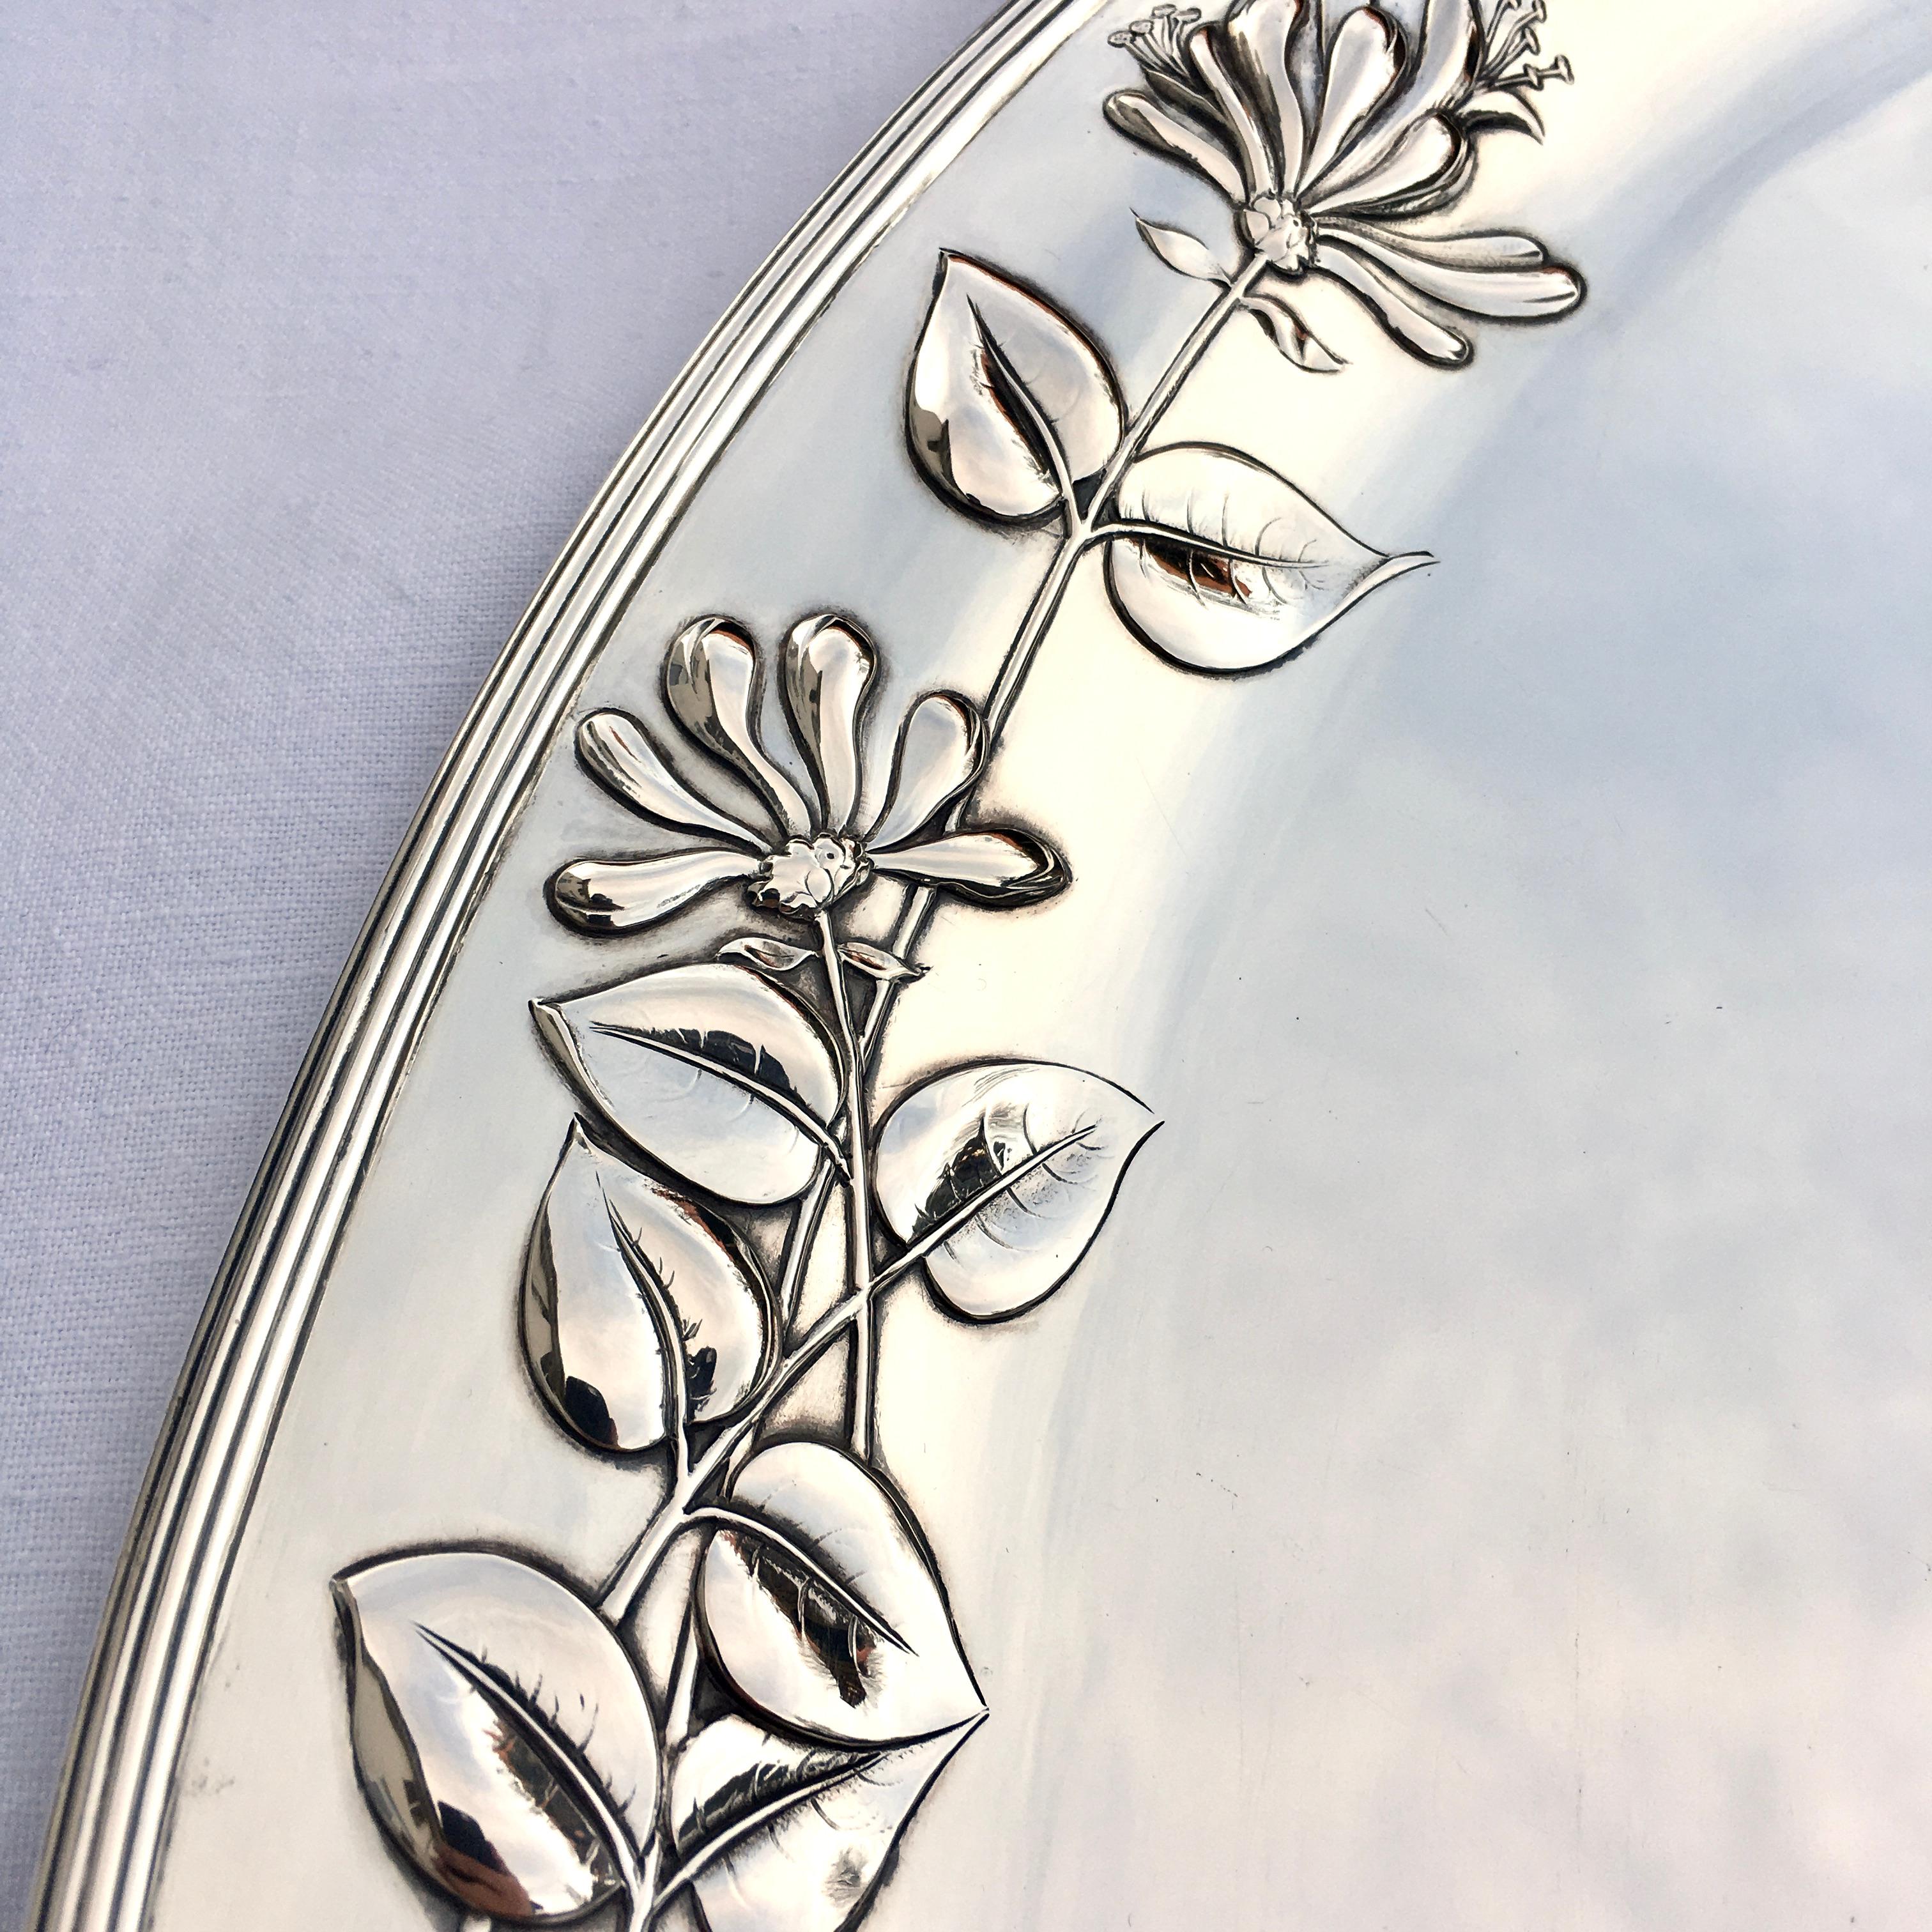 Silver serving platter, Art Nouveau, made by M.H. Wilkens & Söhne, Germany, 1899. Oval asymmetric shape combined with typical Art Nouveau floral decoration. This large unique and excellently made finest oblong silver serving platter of gorgeous